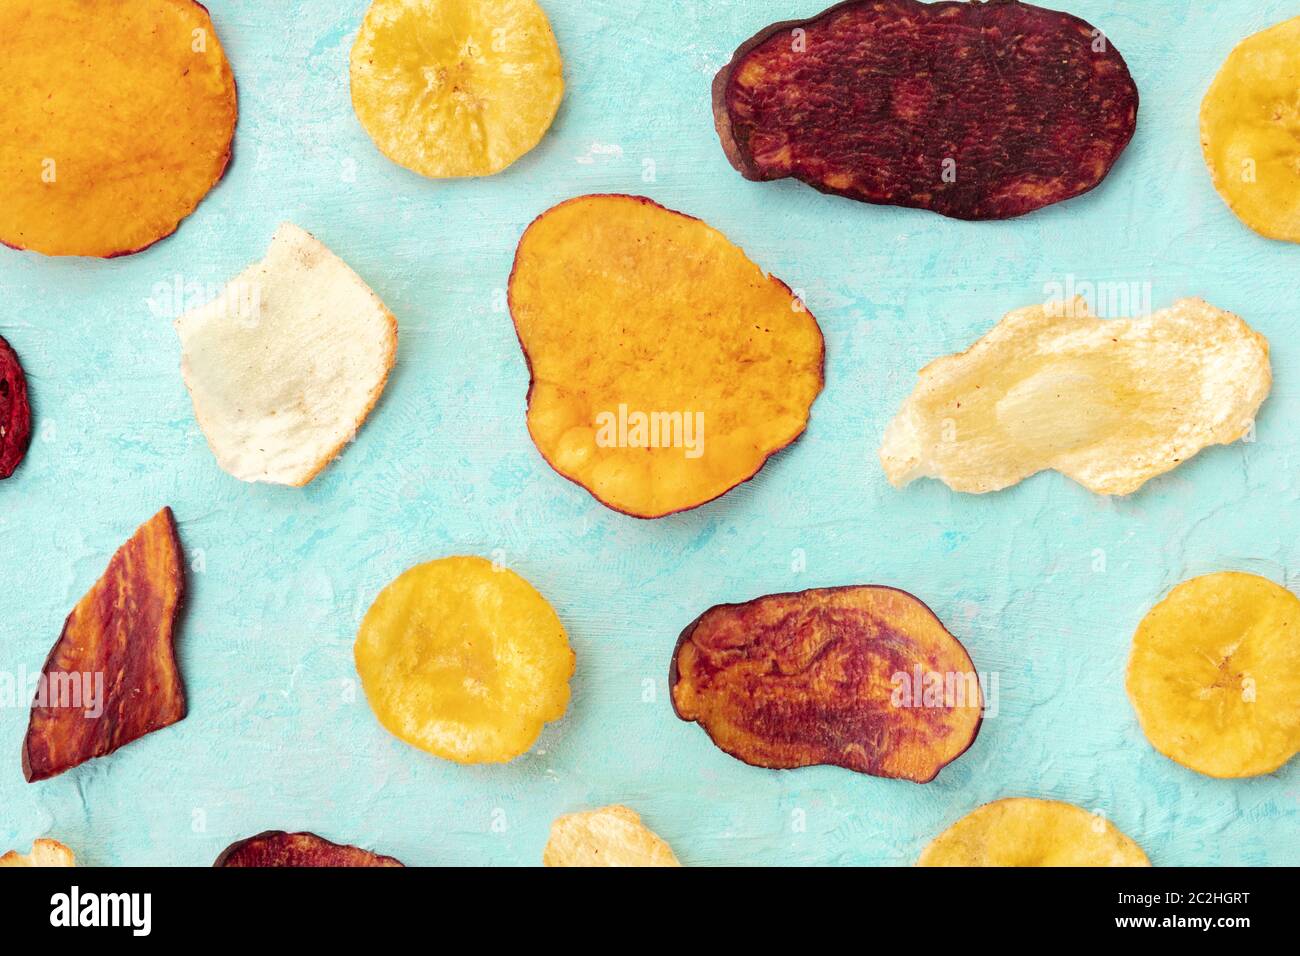 Dry fruit and vegetable chips, top shot. Healthy vegan snack, an organic food flat lay pattern on a teal blue background Stock Photo